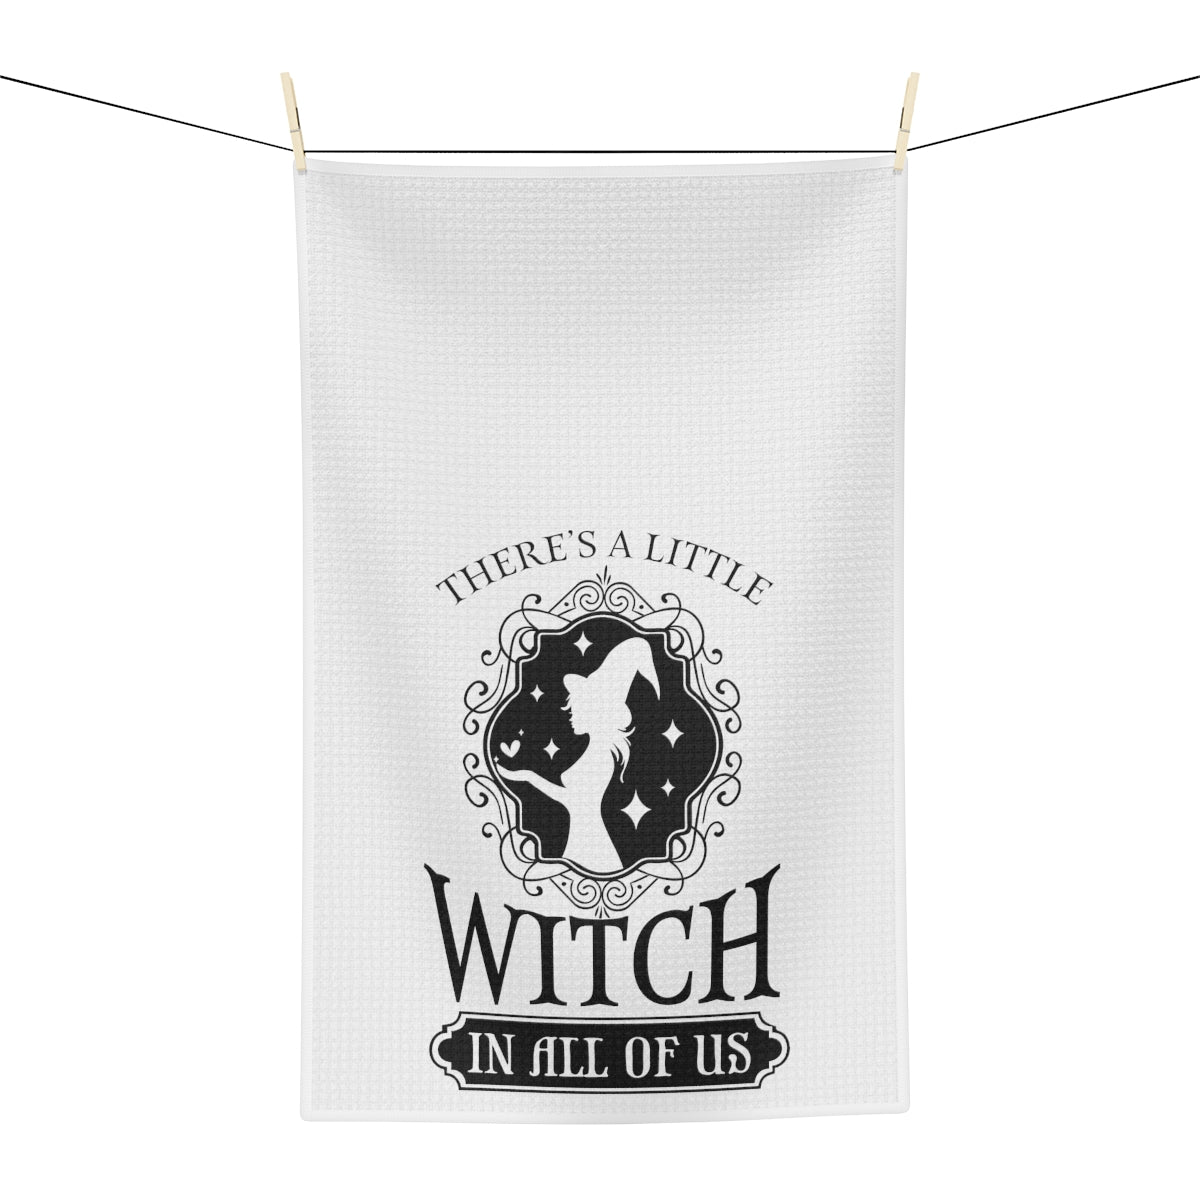 There's a Little Witch in All of Us Tea Towel - Witchy Kitchens